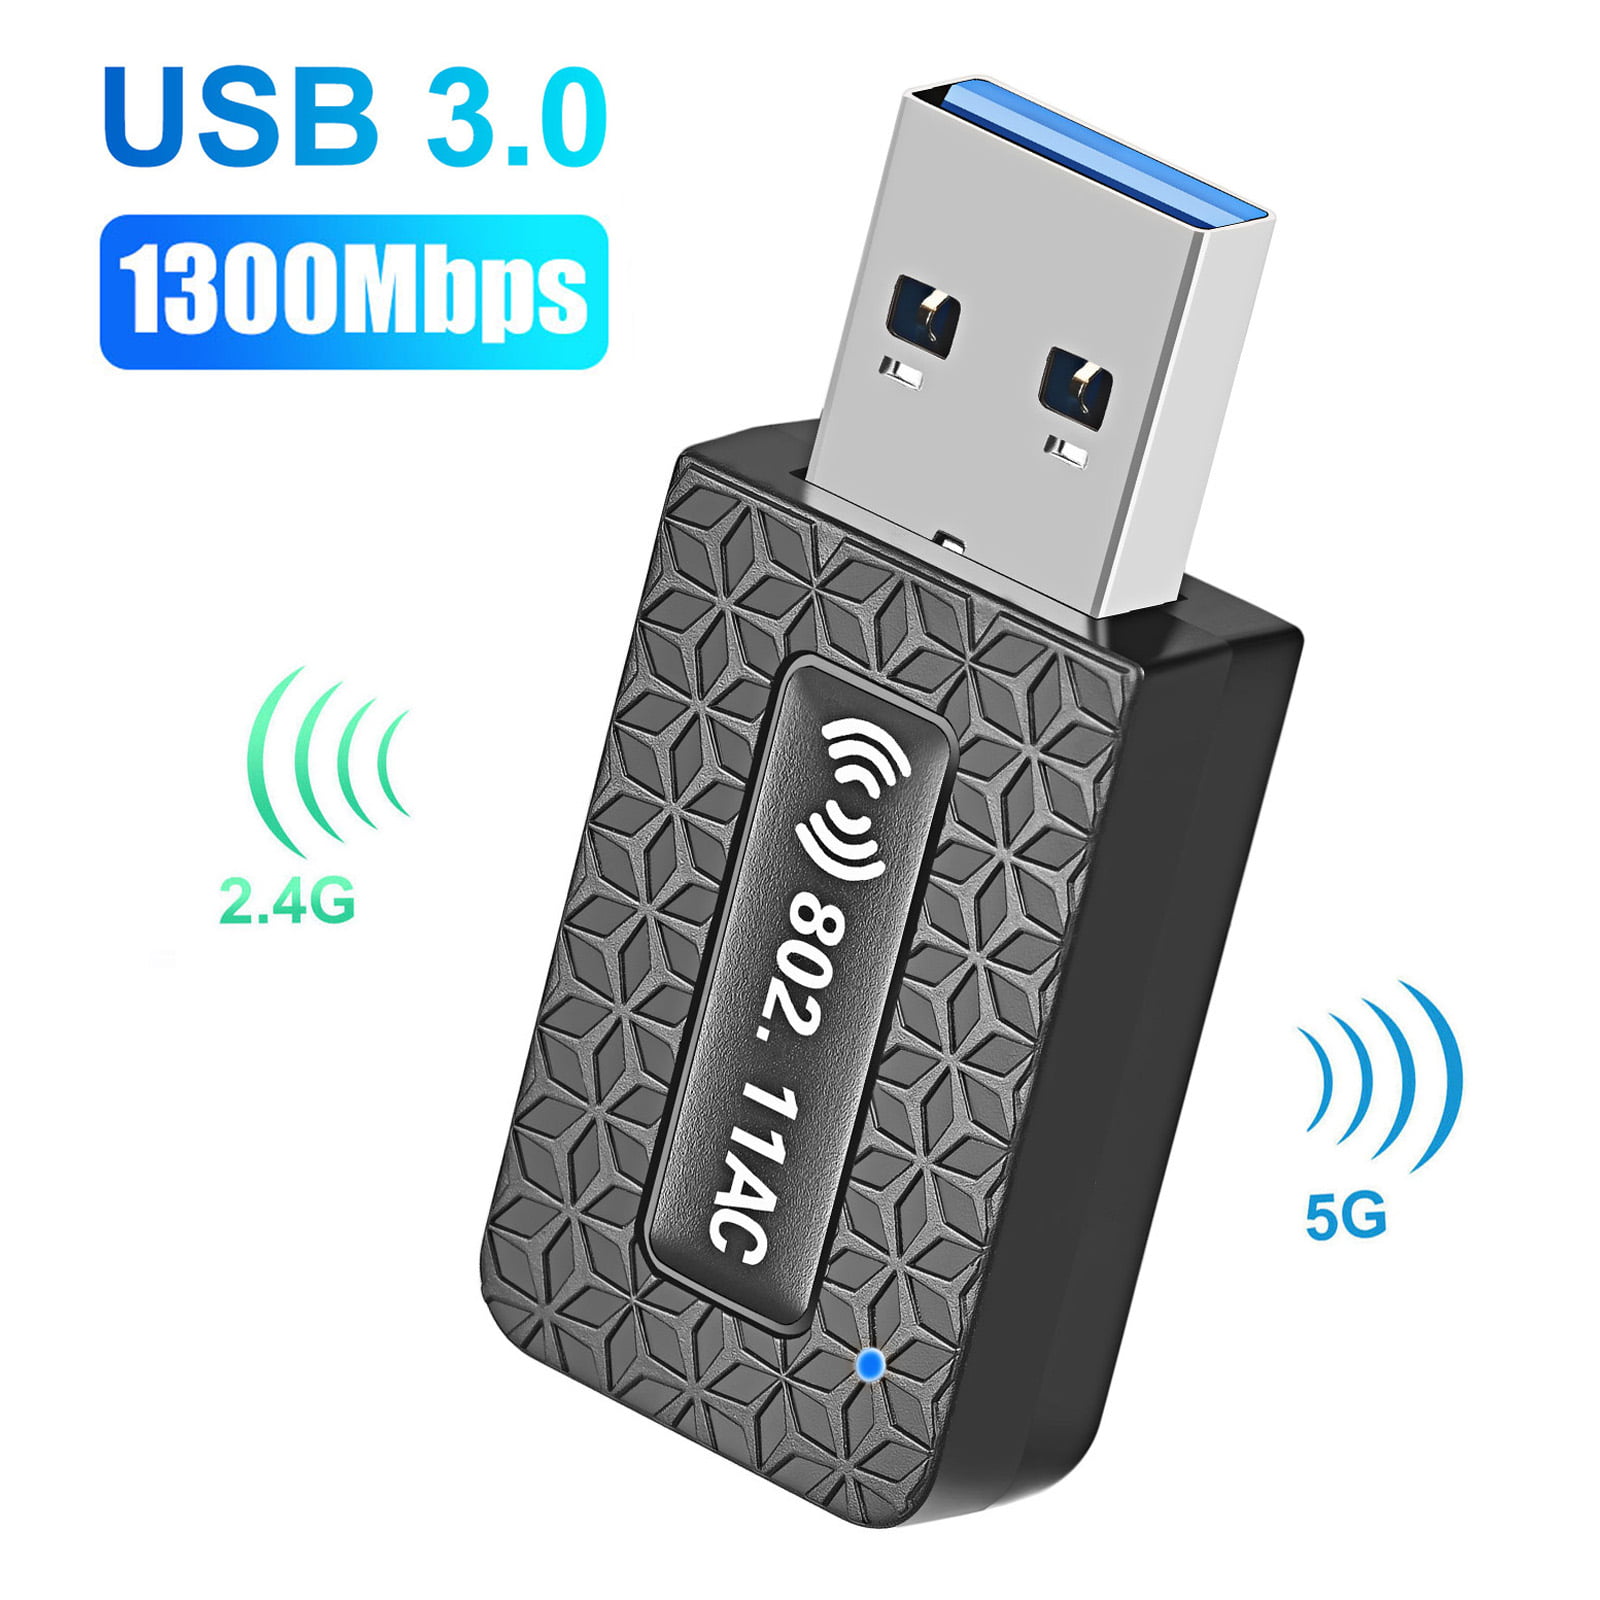 farmers Honorable heroin USB Wifi Adapter, 1300M USB 3.0 WiFi Adapter for PC, Desktop, Laptop, Dual  Band 5G /2.4G USB WiFi Dongle Wireless Network Adapter, Supports Windows  10/8/8.1/7/XP, Mac OS, Linux - Walmart.com